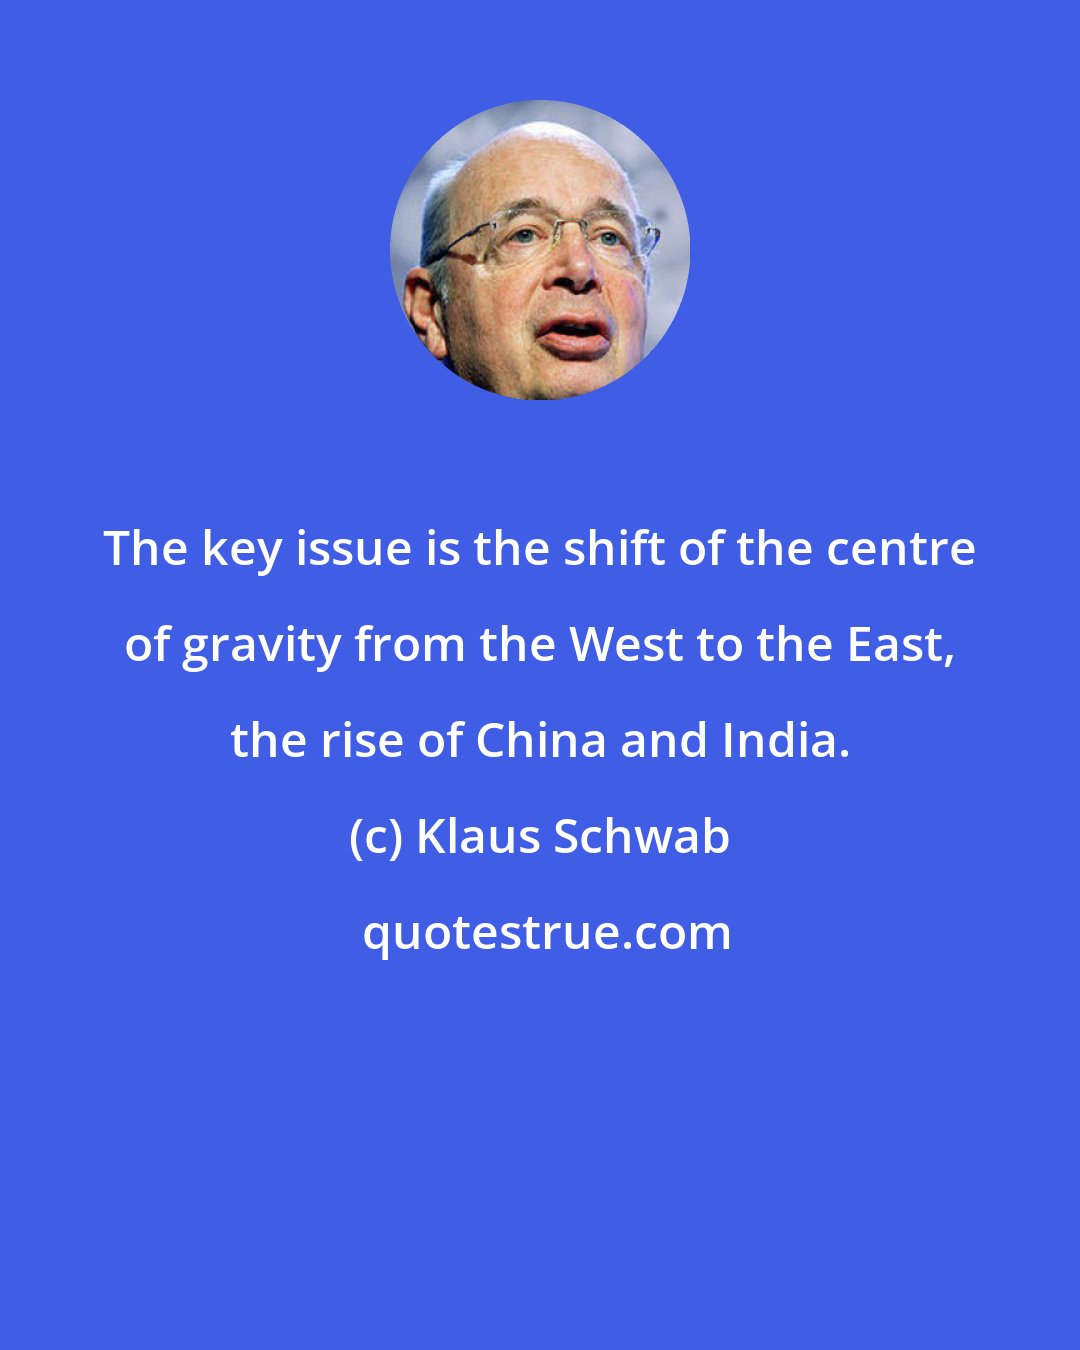 Klaus Schwab: The key issue is the shift of the centre of gravity from the West to the East, the rise of China and India.